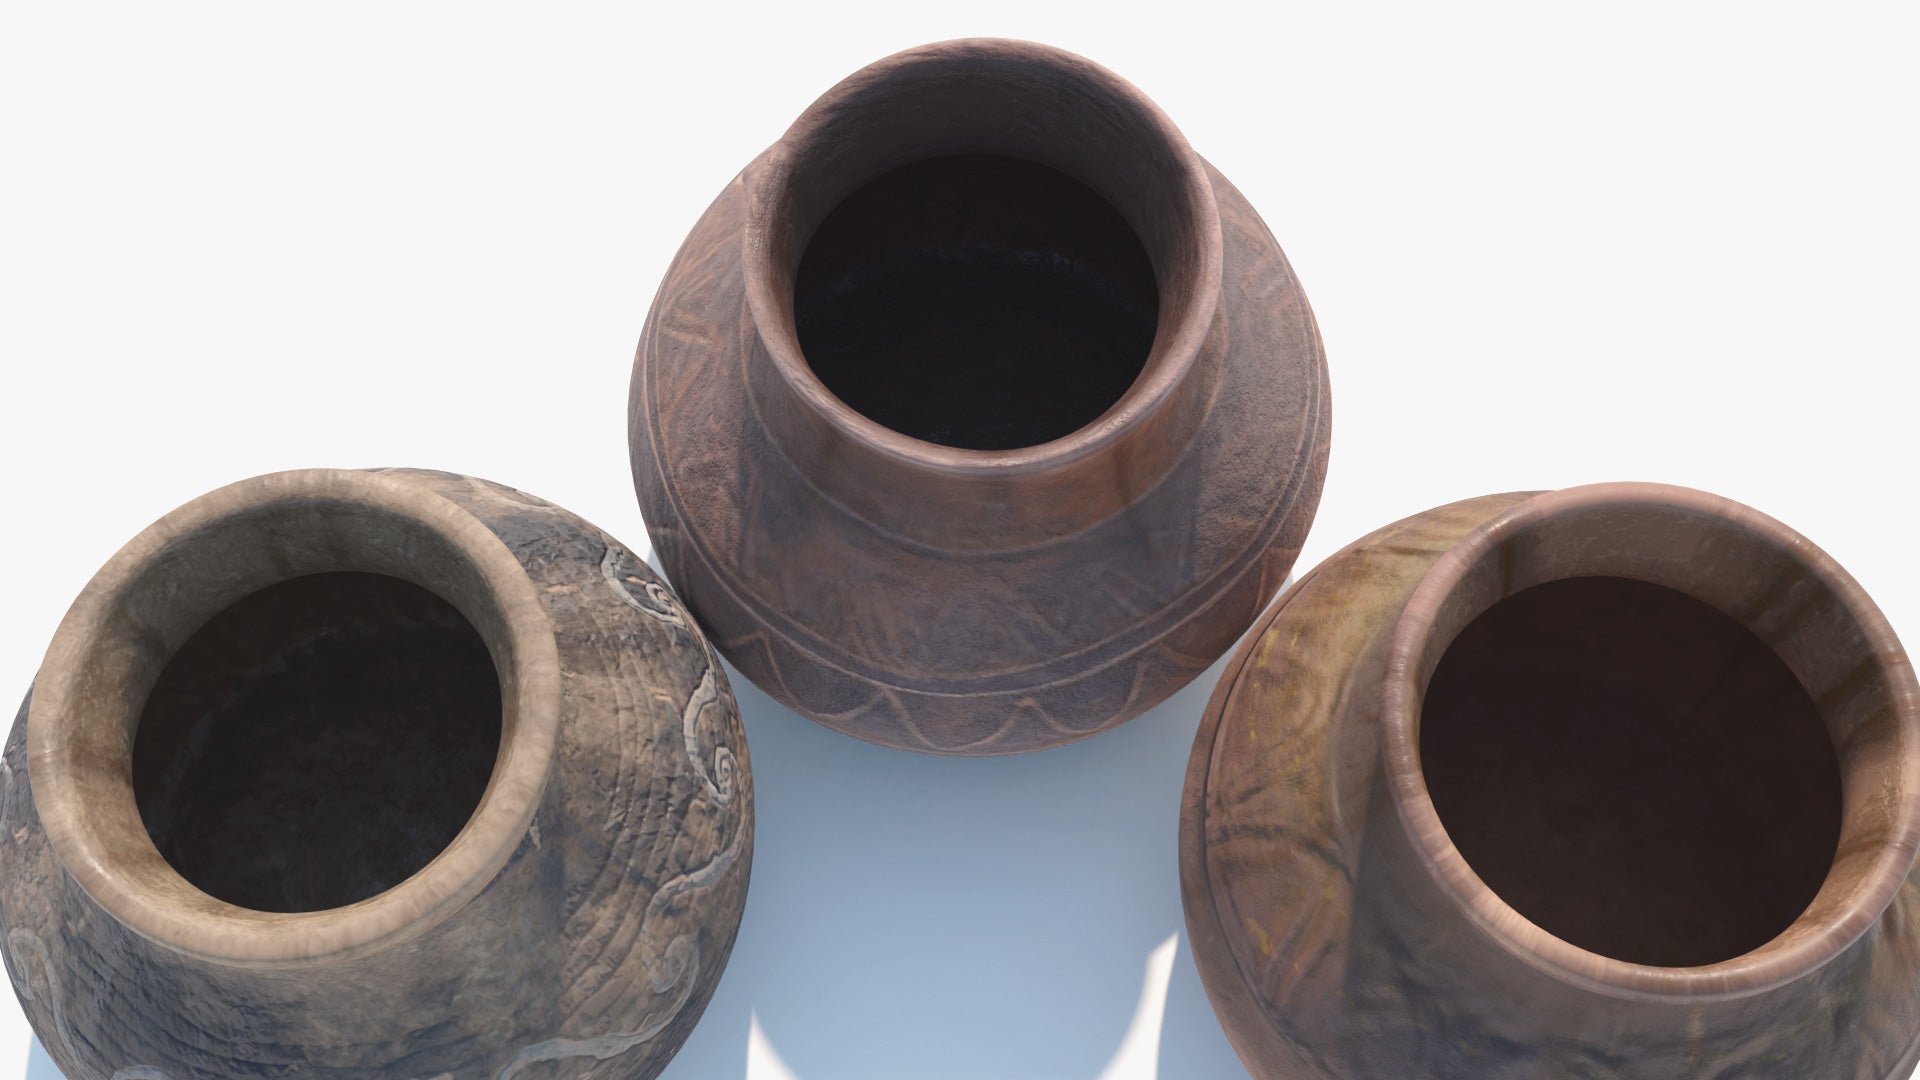 Top view of a 3D model of three ancient vessels made of clay, with different designs and a very handmade and weathered appearance. They model have low polycount and PBR textures, and for that, they look very realistic